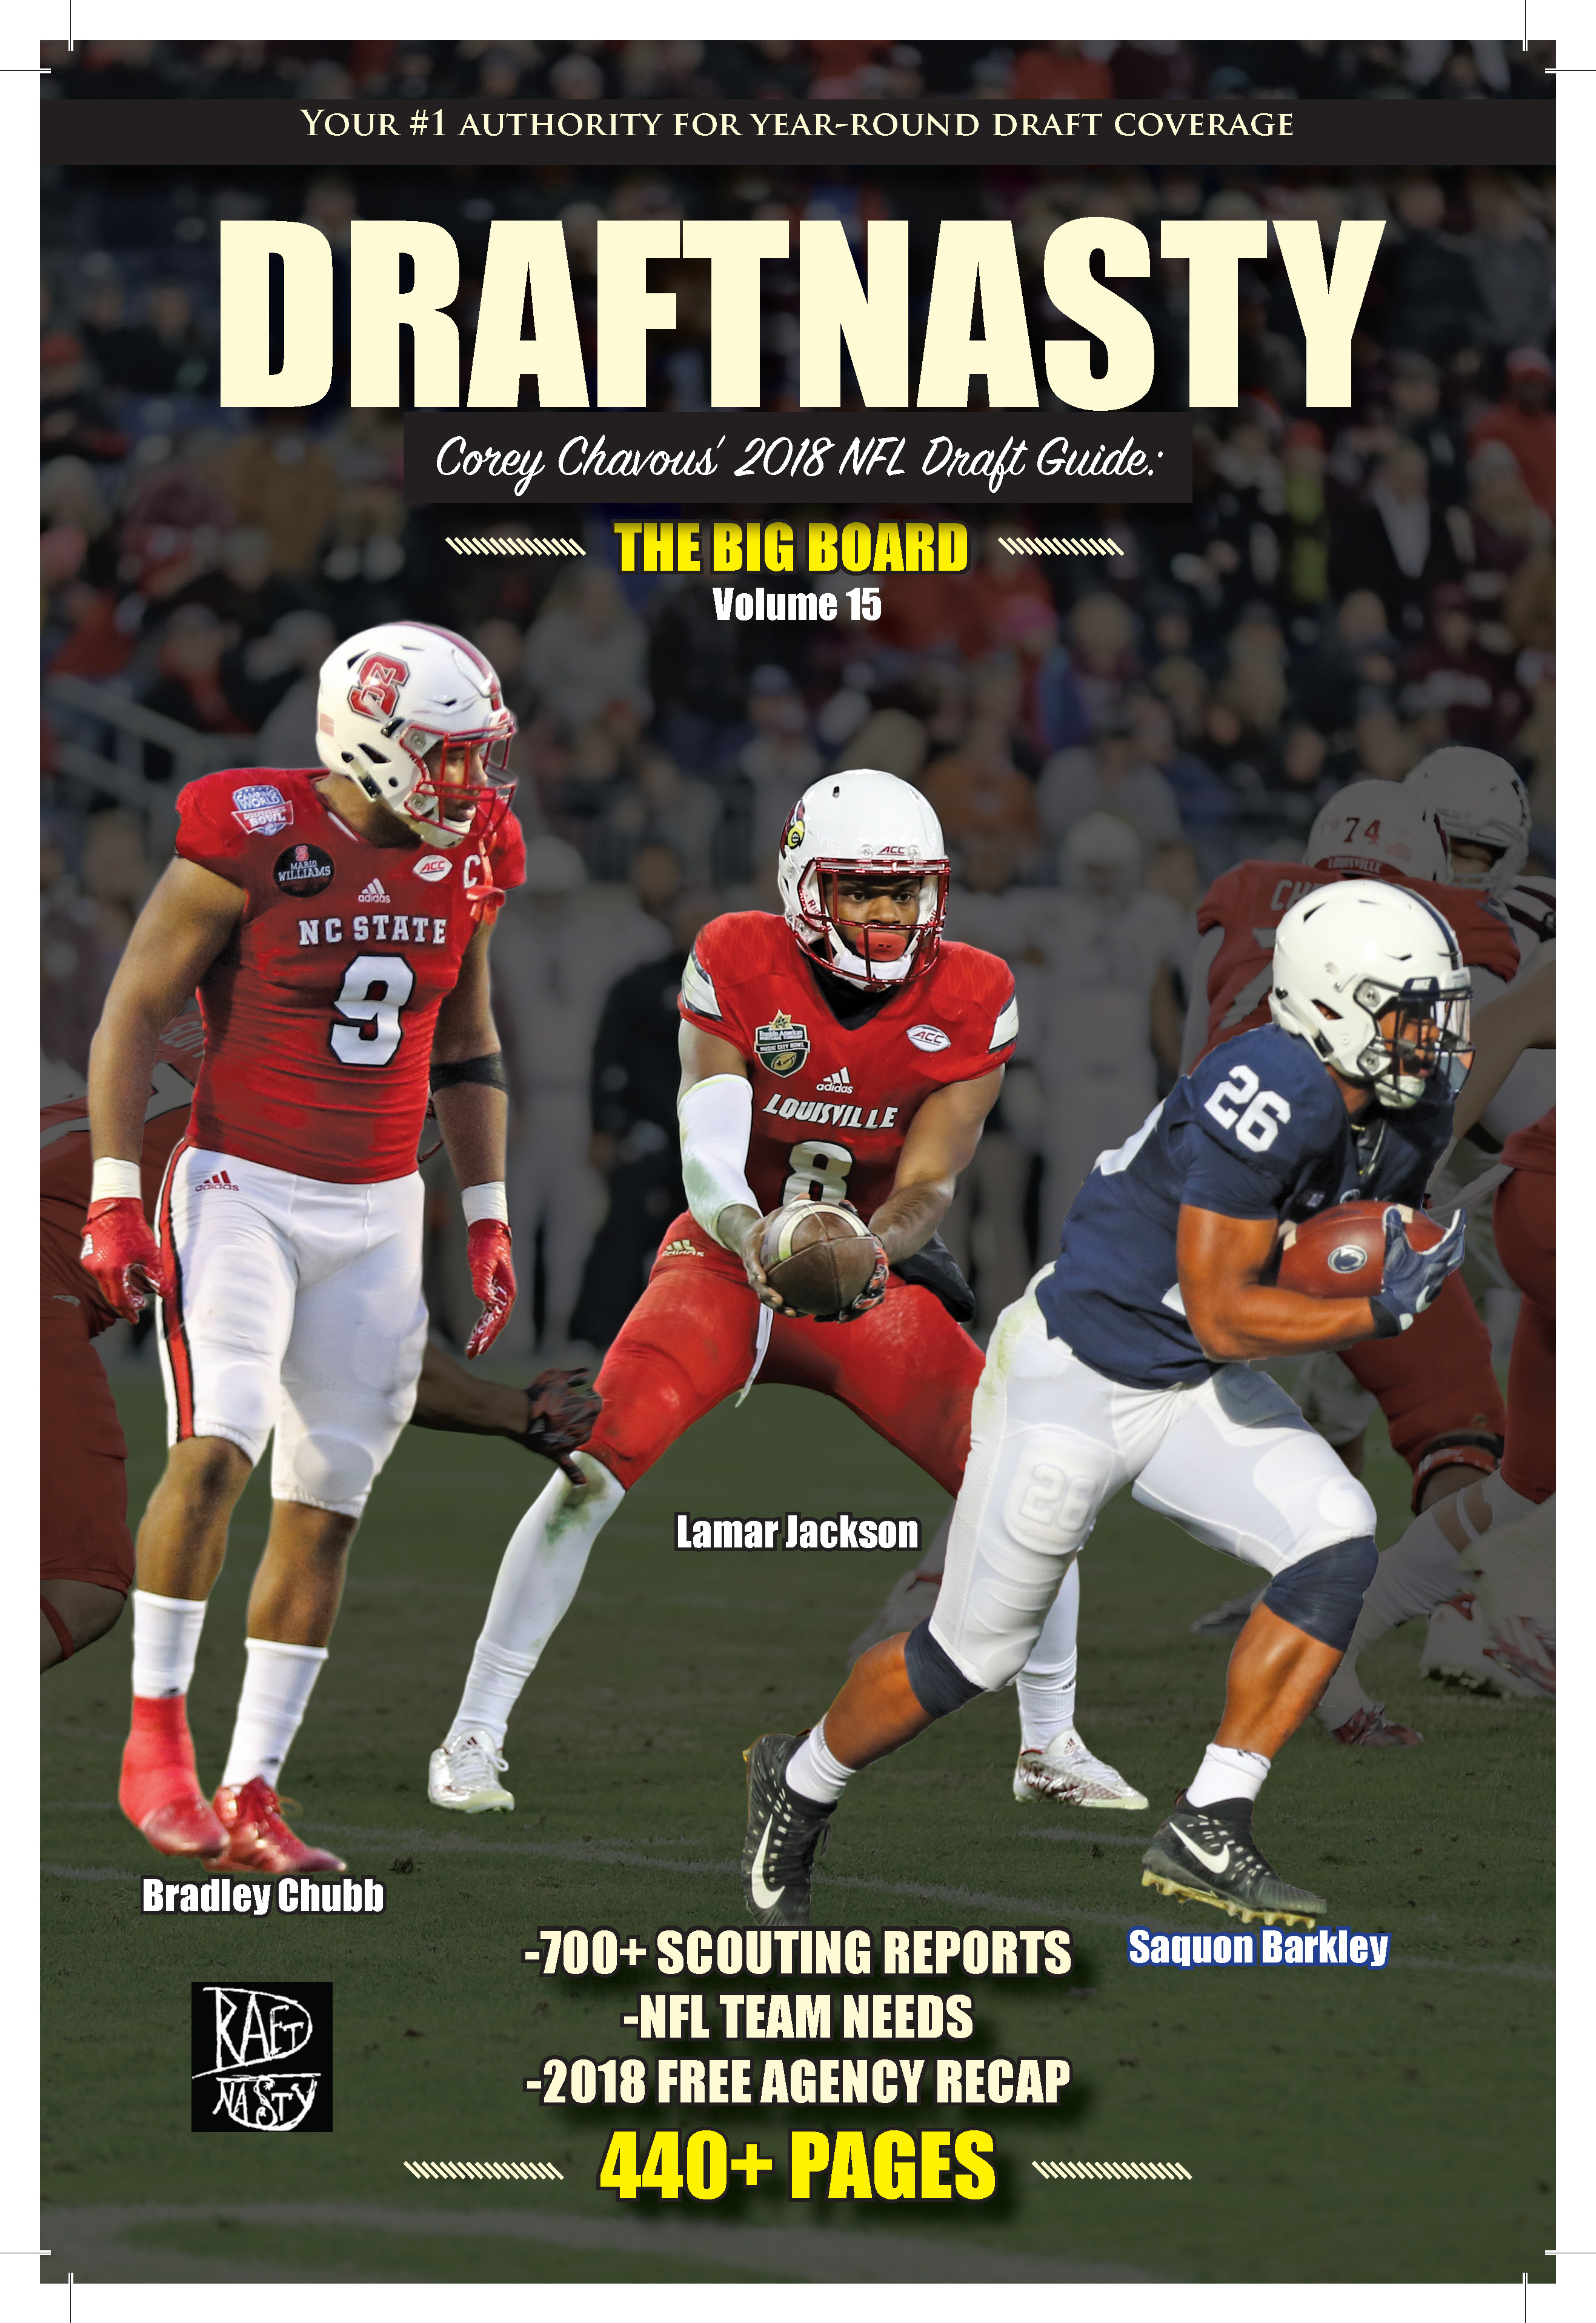 Corey Chavous 2018 NFL Draft Guide